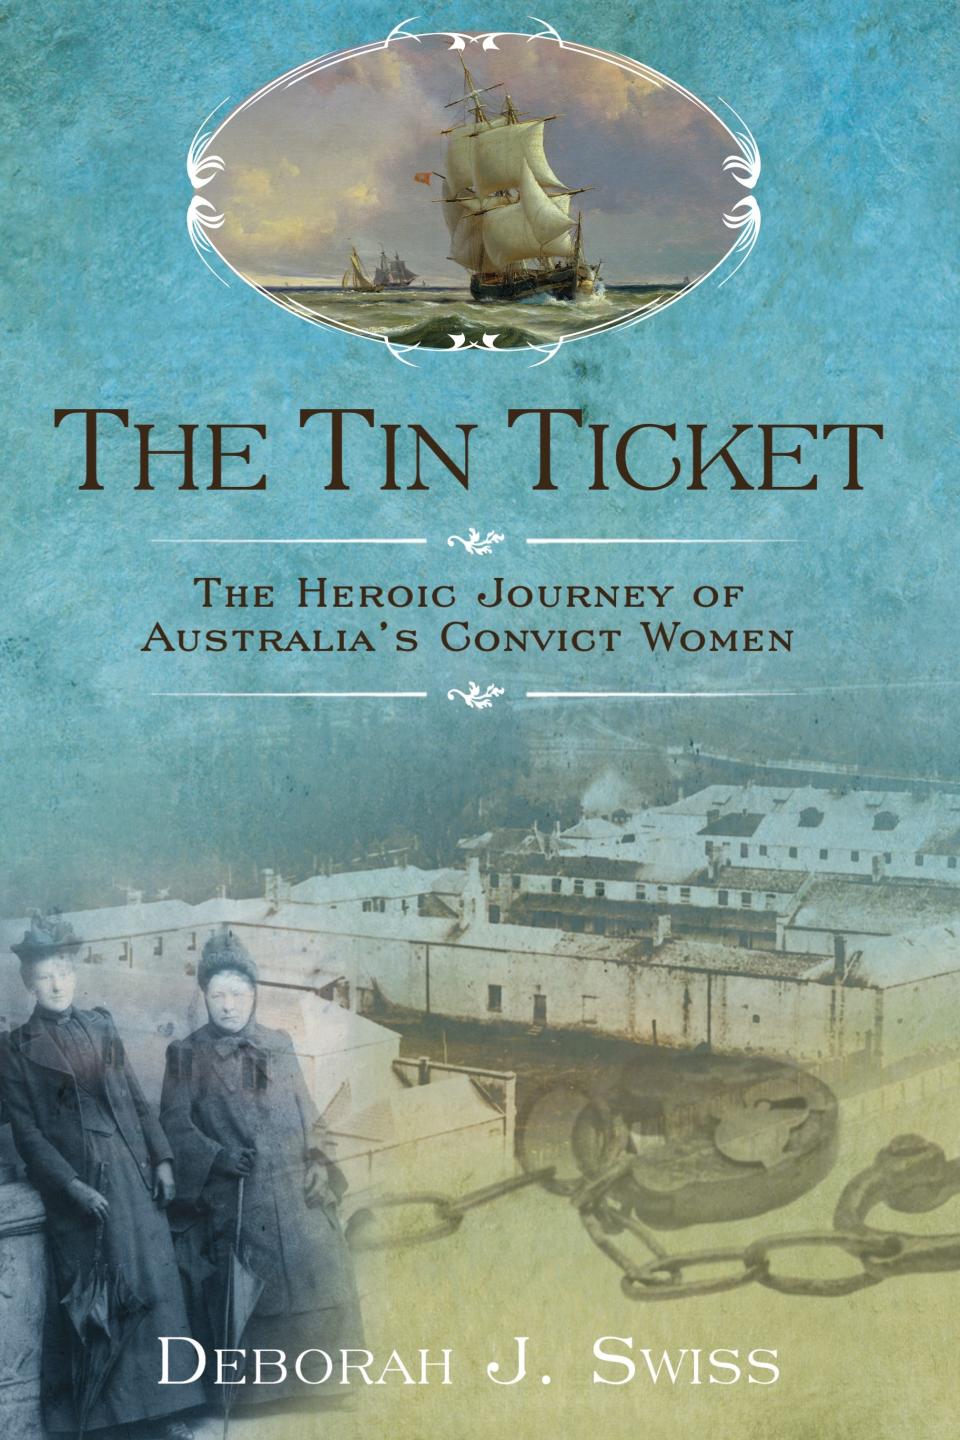 Deborah J. Swiss' book 2011 book "The Tin Ticket" describes the dramatic historical changes set in motion when, between 1788 and 1868, more than 25,000 British and Irish women prisoners — most serving long, cruel sentences for minor theft — were sent to Australia as "breeders and tamers."